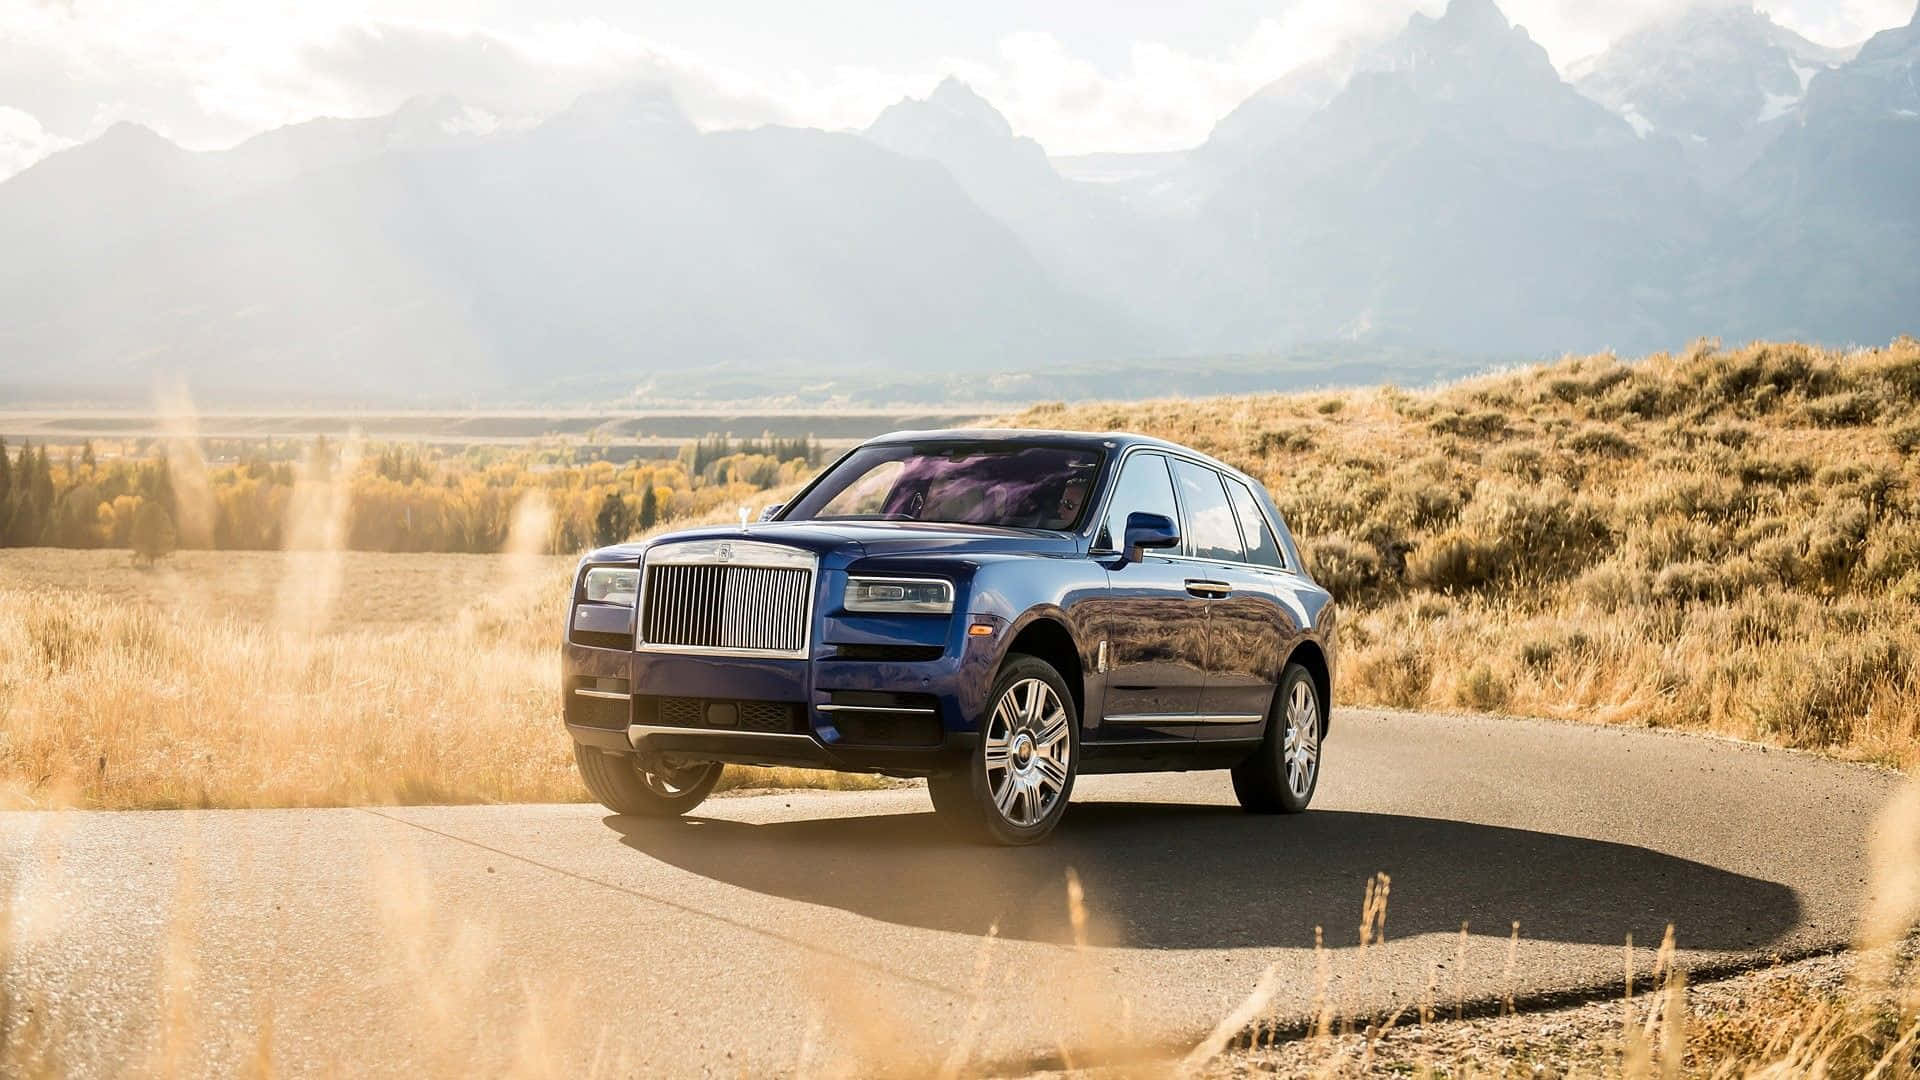 Caption: The Epitome Of Luxury: Rolls-royce Cullinan In Stunning Silver Wallpaper